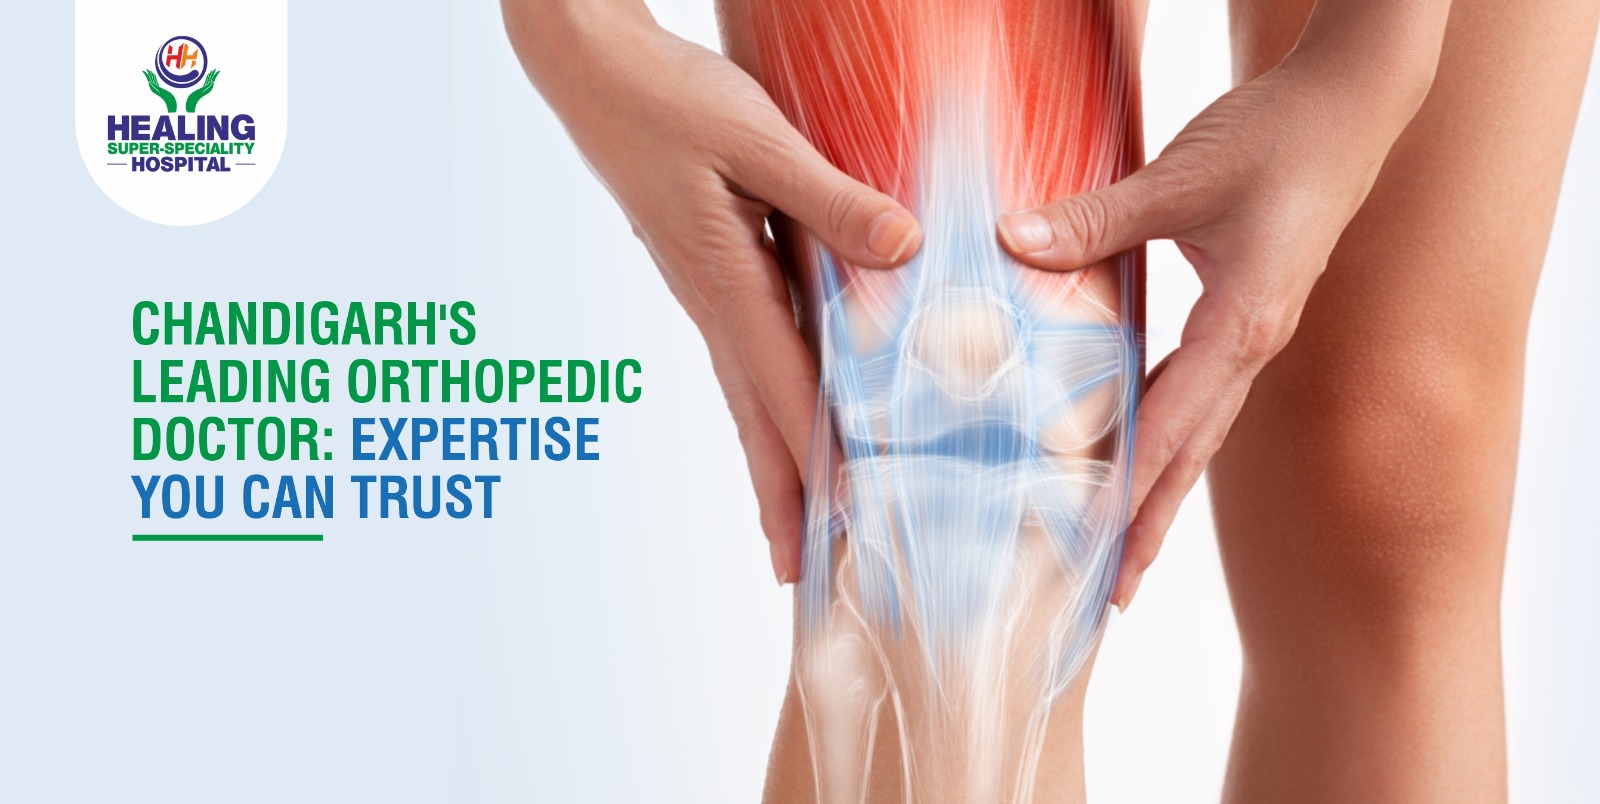 Chandigarh’s Leading Orthopedic Doctor: Expertise You Can Trust